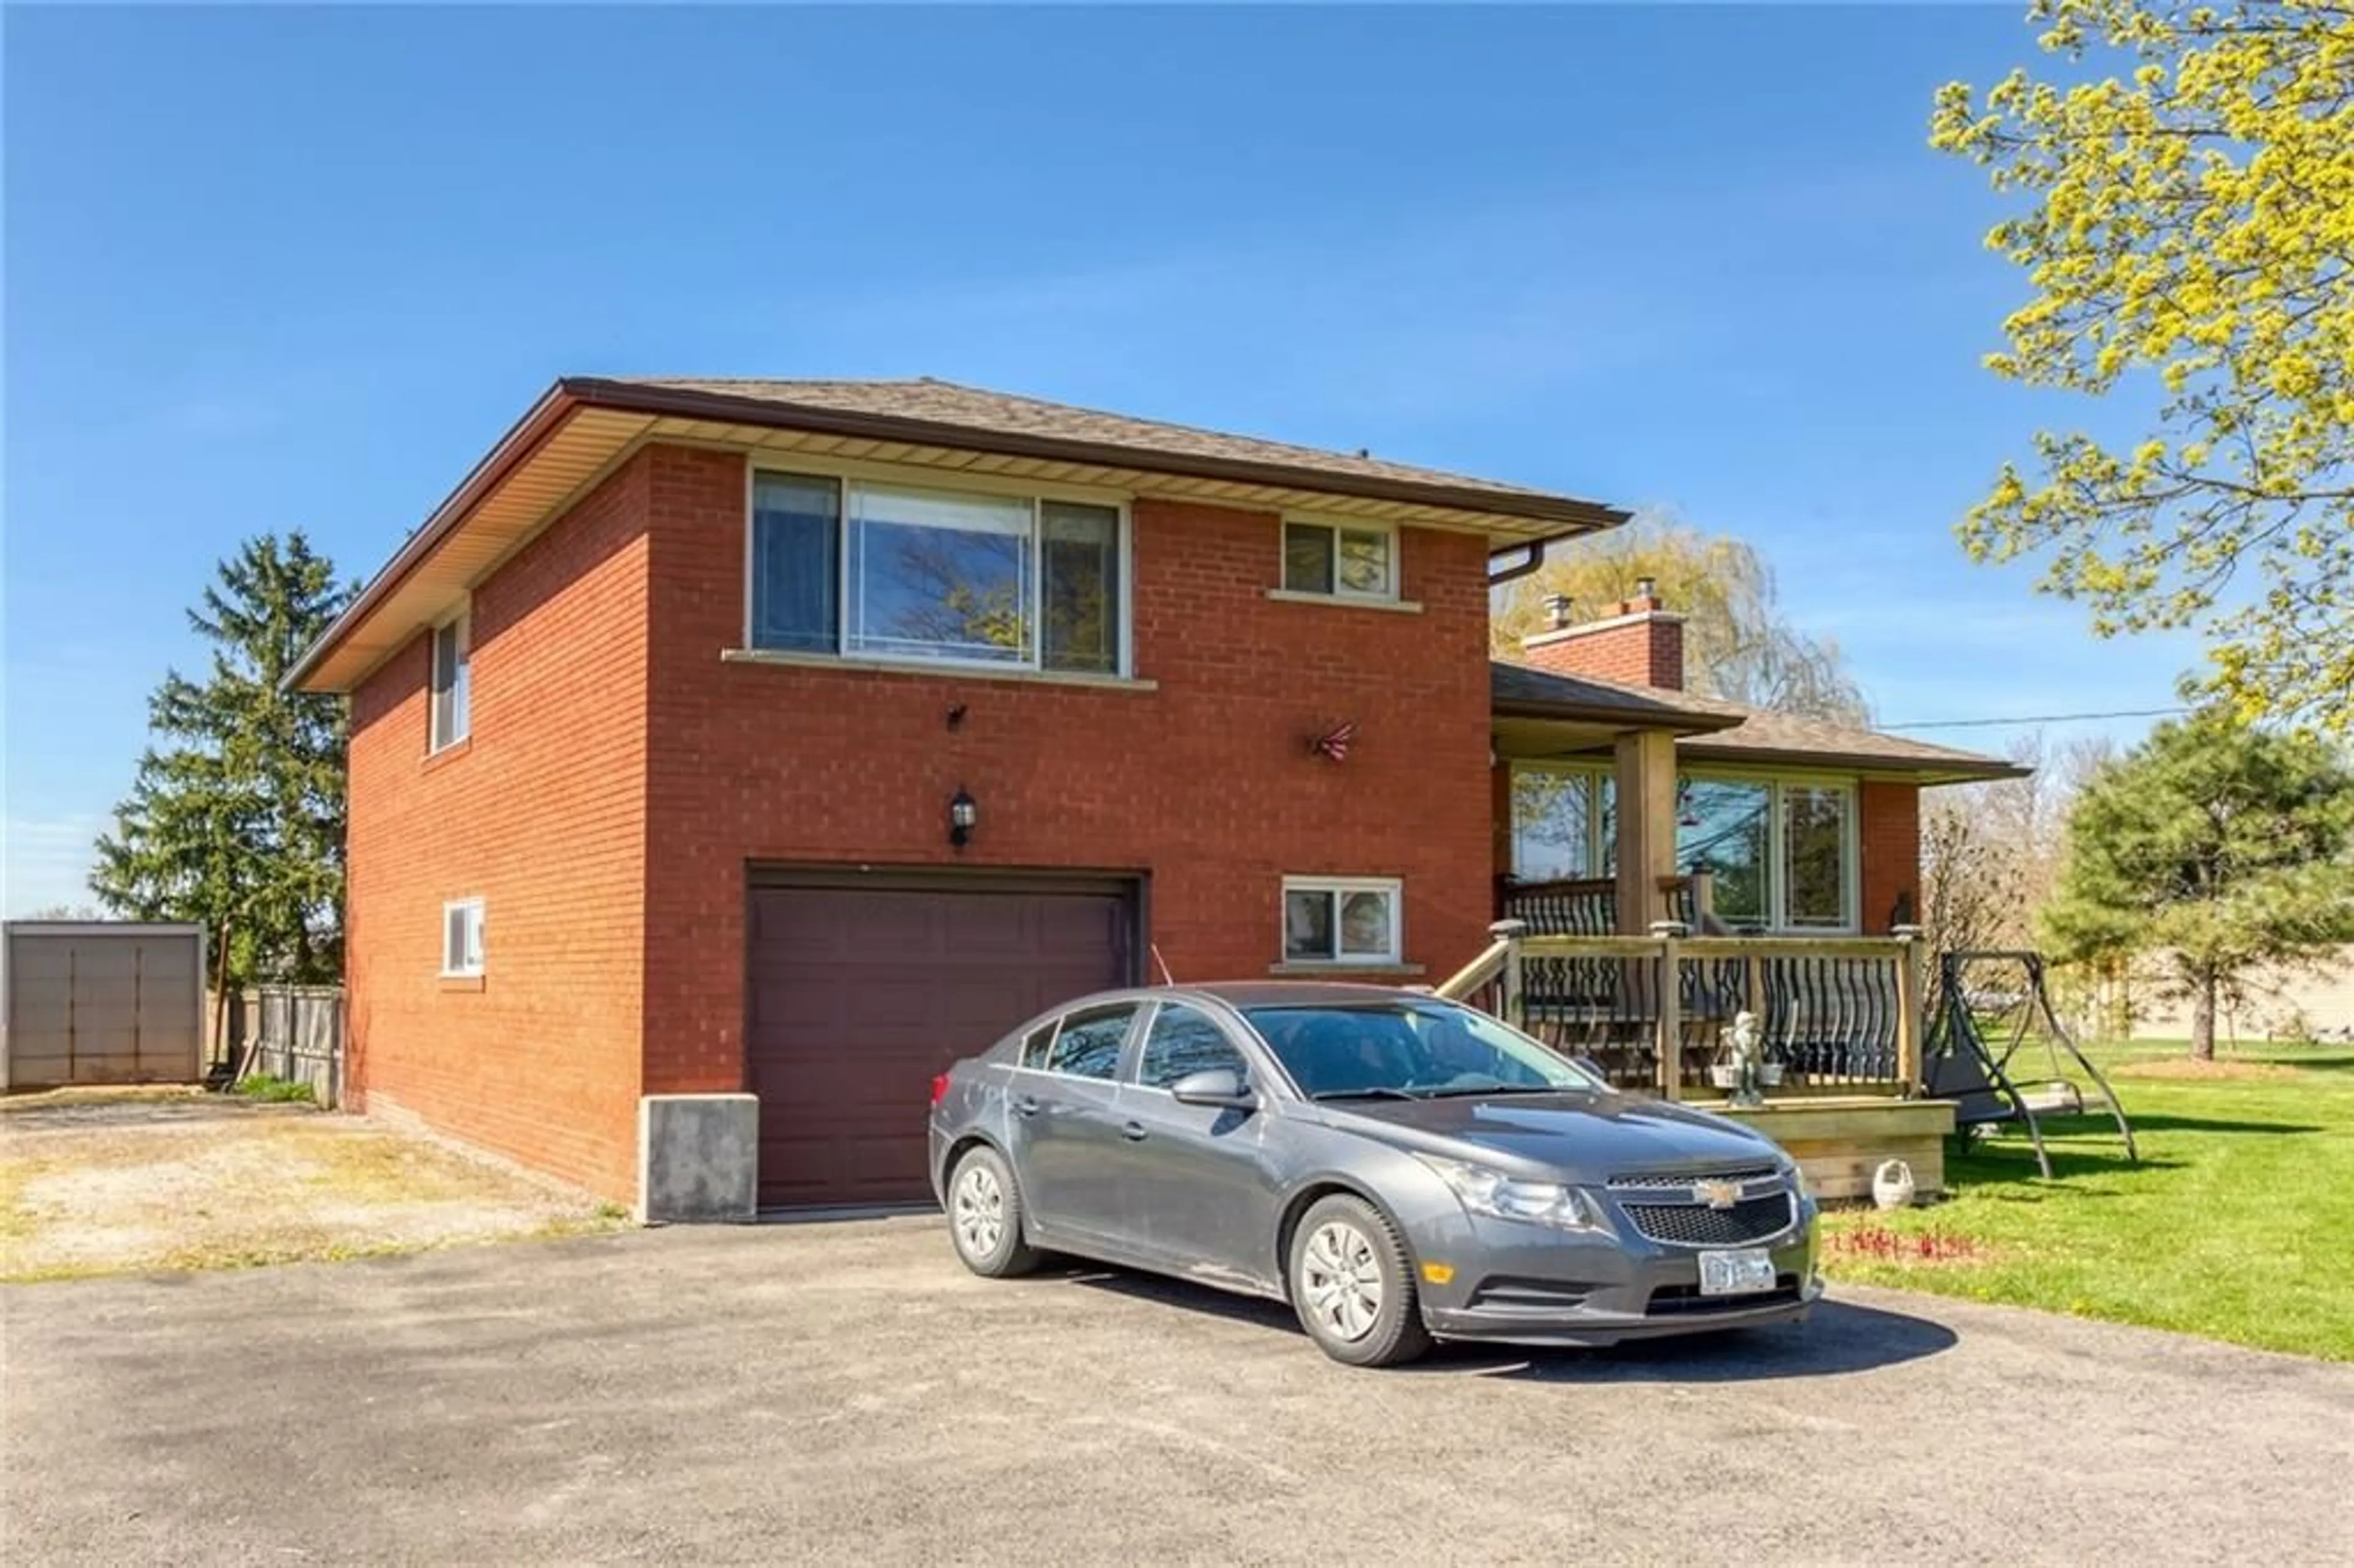 Frontside or backside of a home for 1377 Haldibrook Rd, Caledonia Ontario N3W 1N6